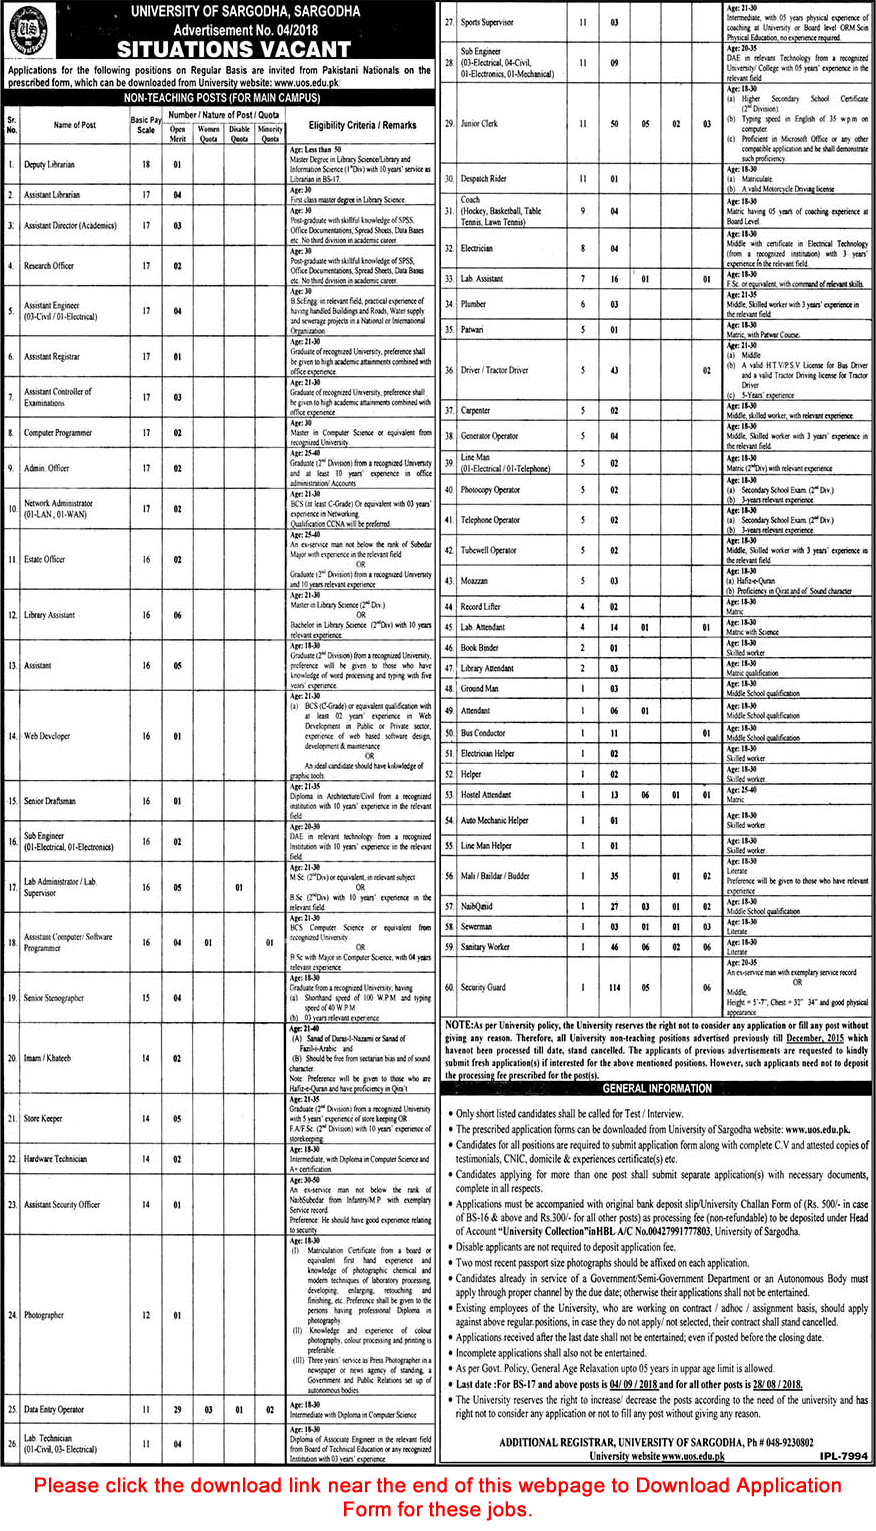 University of Sargodha Jobs August 2018 Application Form Clerks, DEO, Naib Qasid, Security Guards & Others Latest